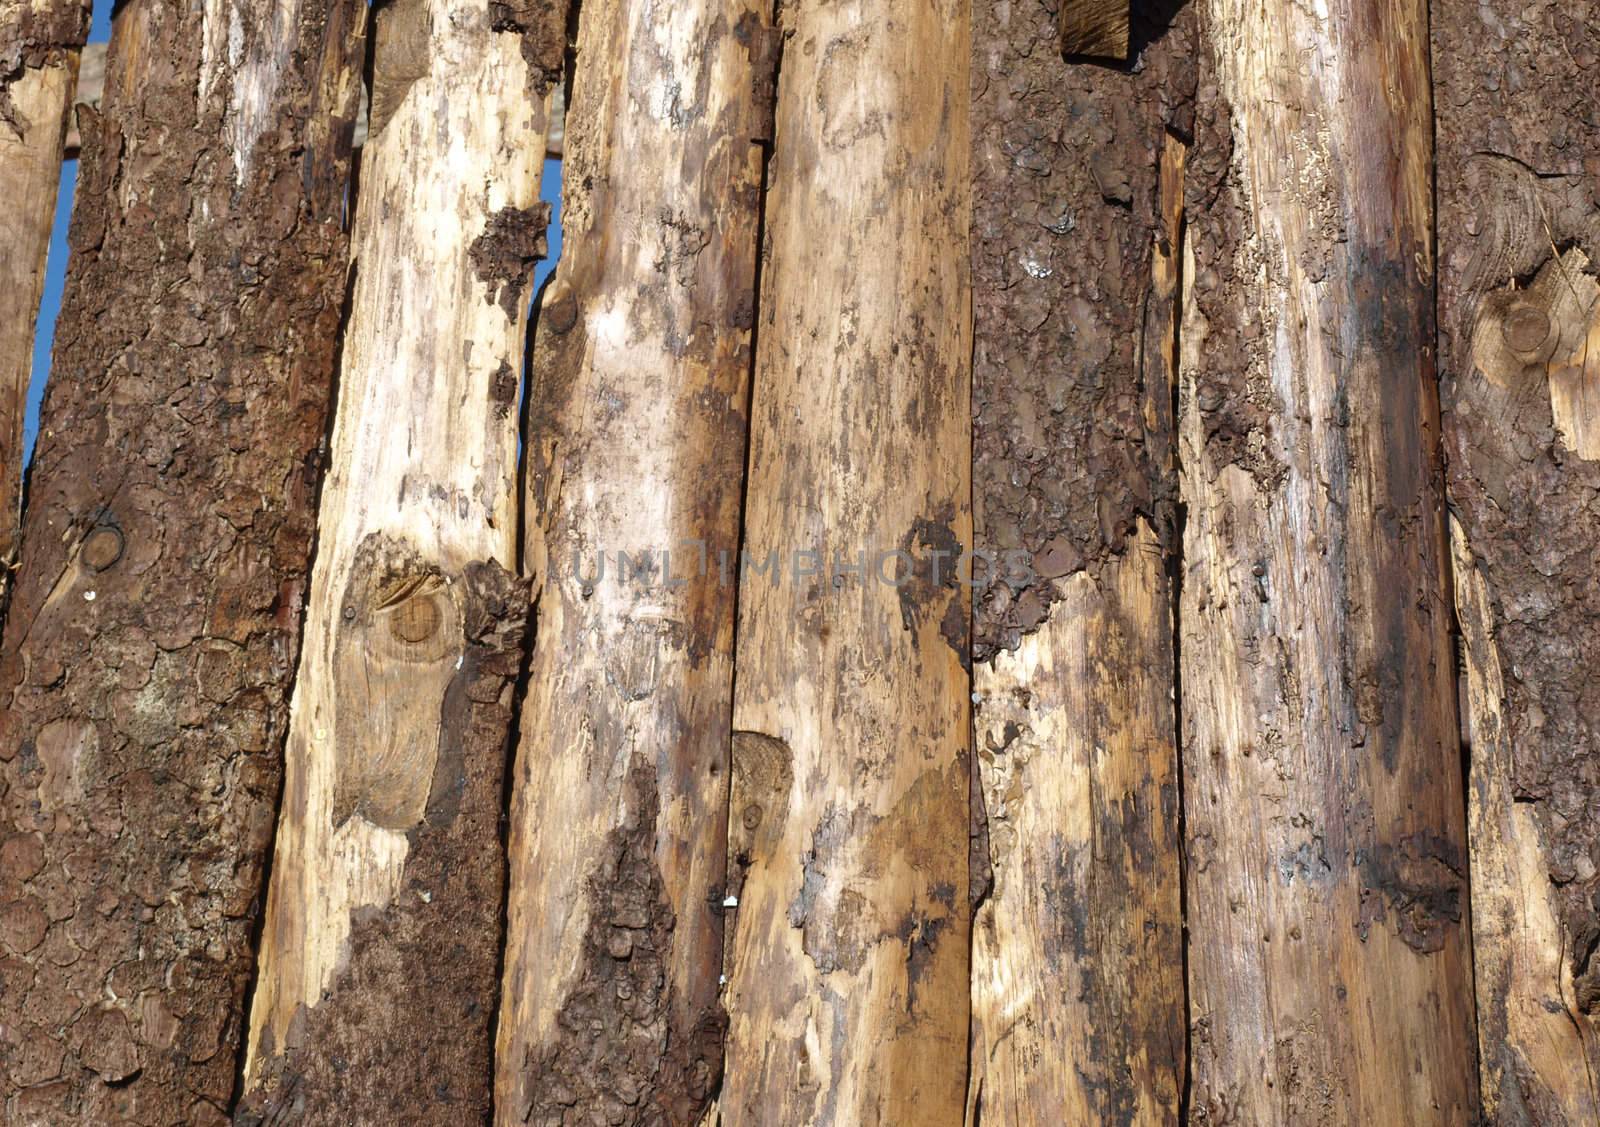 Old wood logs or plank board background